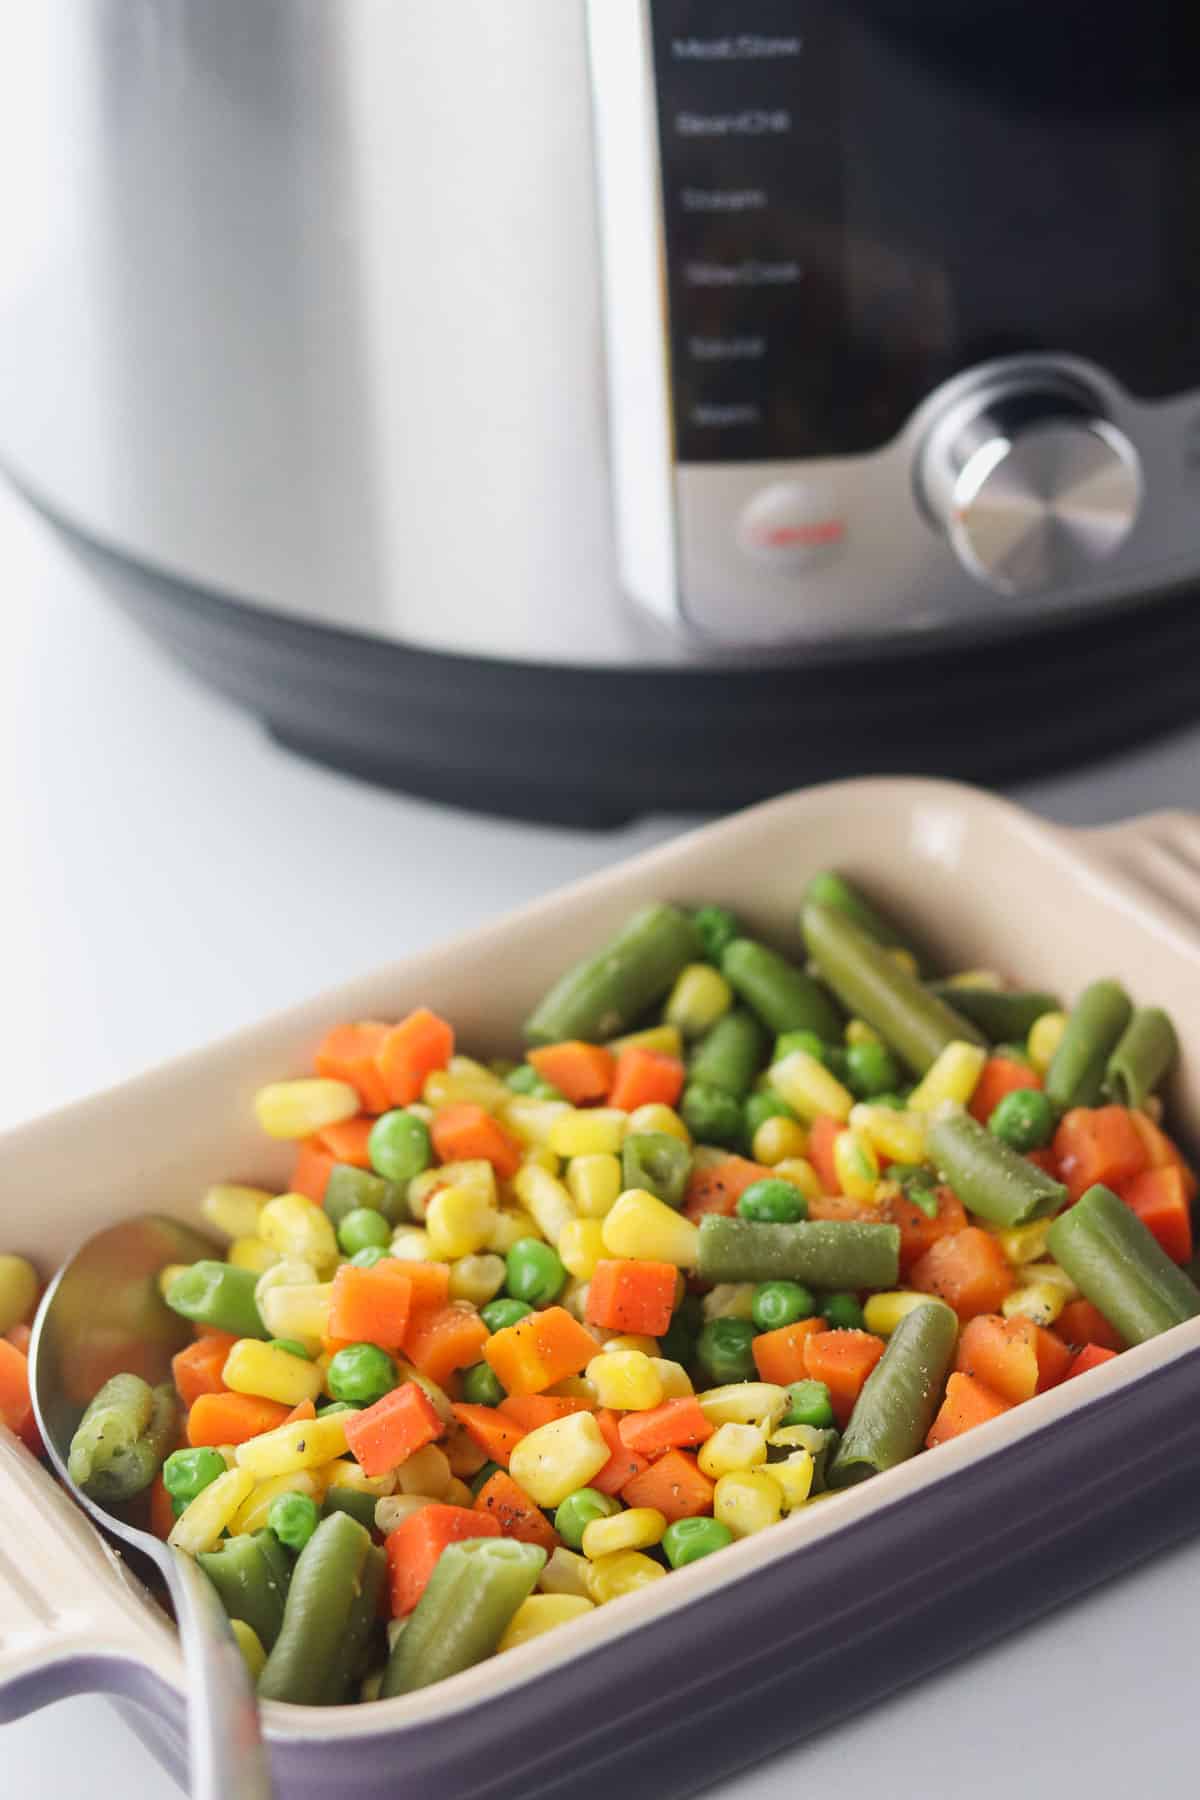 dish of mixed vegetables in front of the instant pot